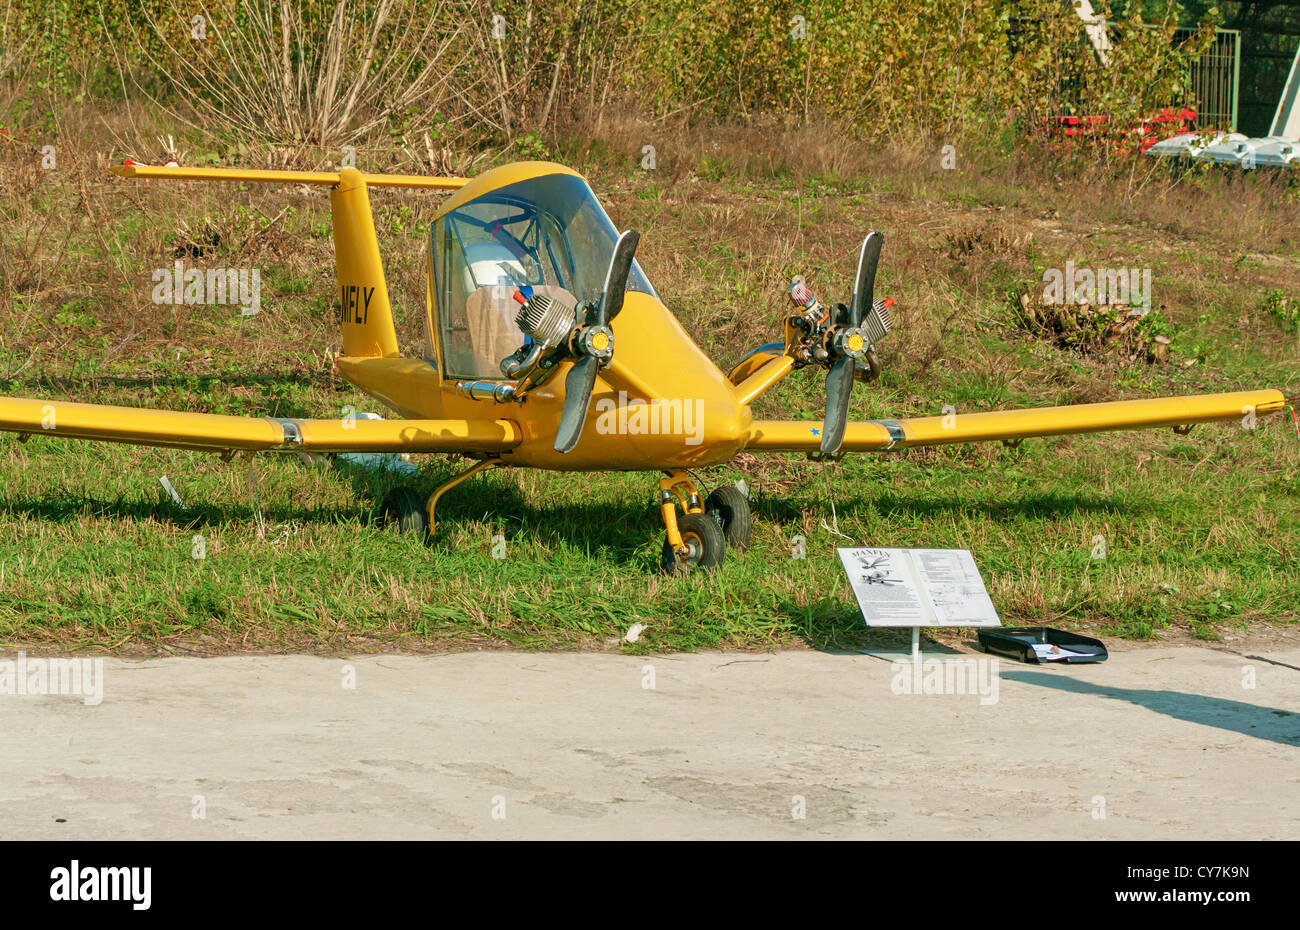 Homebuilt Airplane High Resolution Stock Photography and Images - Alamy